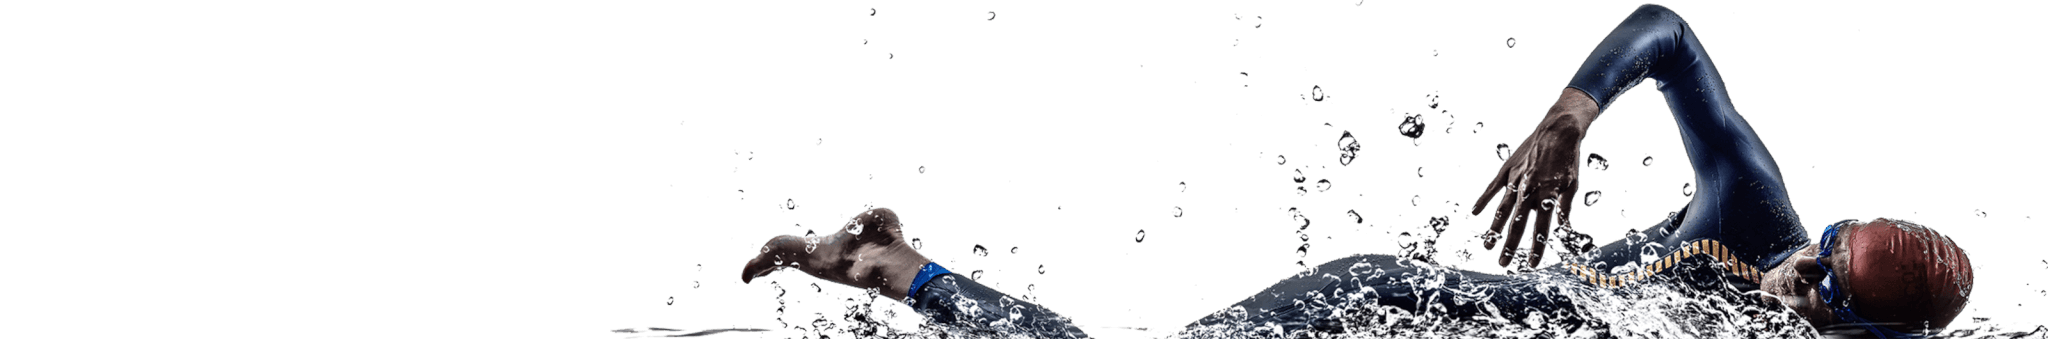 http://ndrowing.ca/wp-content/uploads/2017/10/inner_swimmer.png